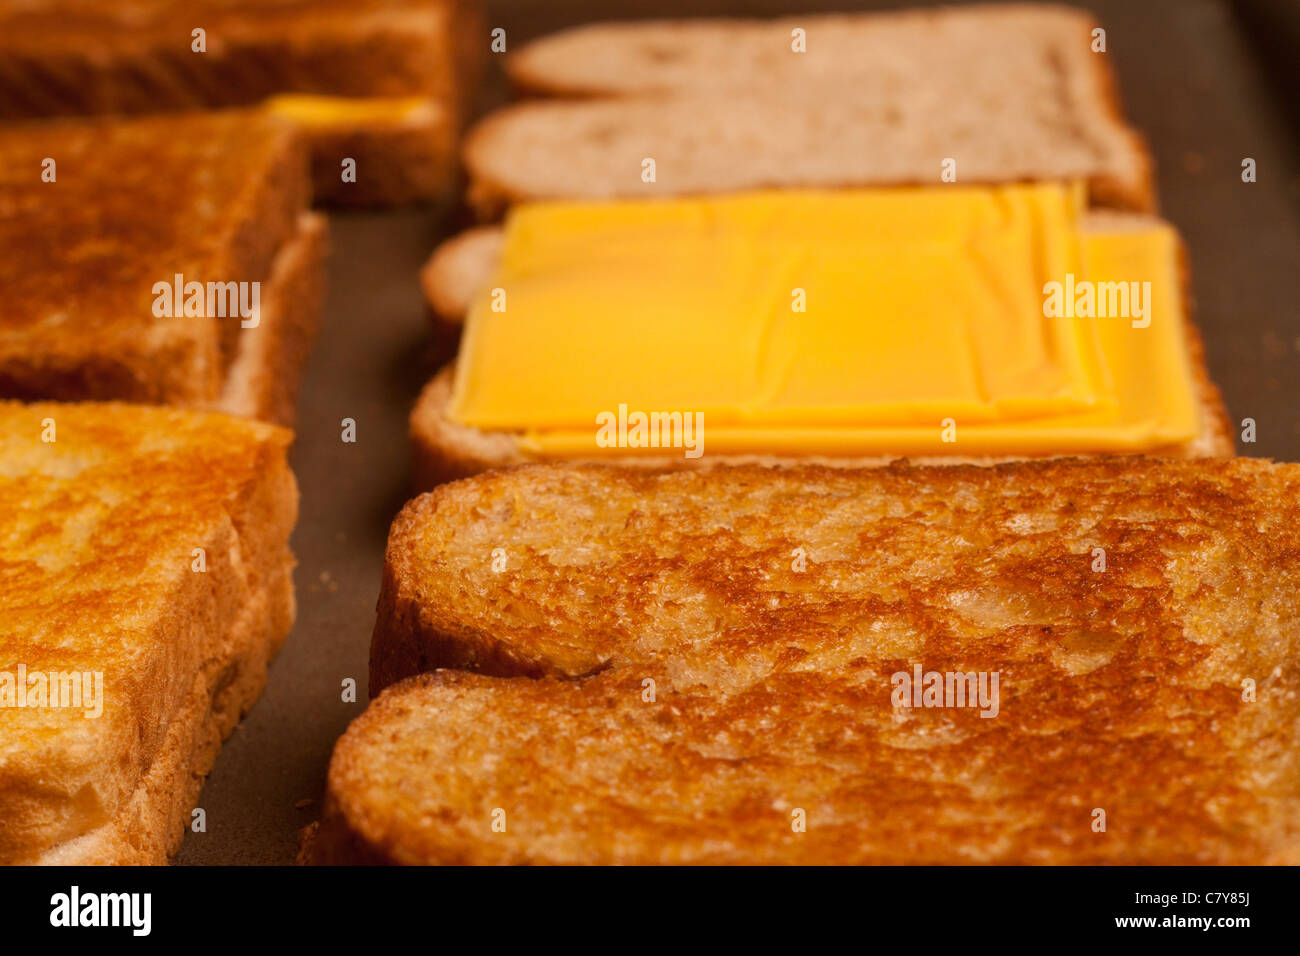 Golden brown grilled cheese being cooked on a flat grill Stock Photo